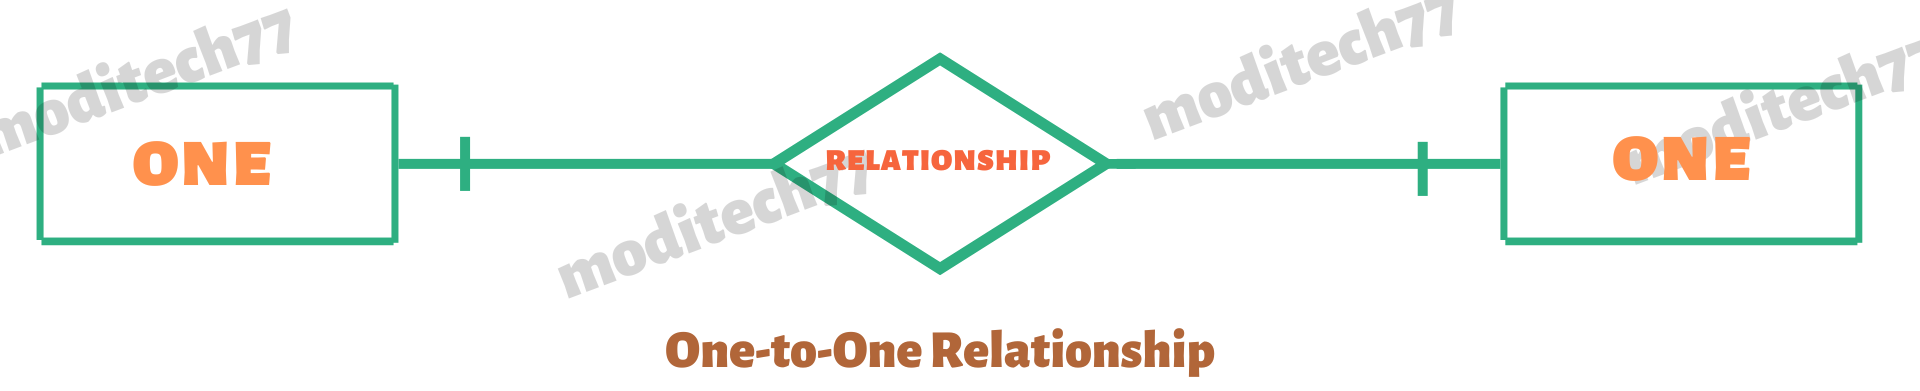 One-to-One Relationships